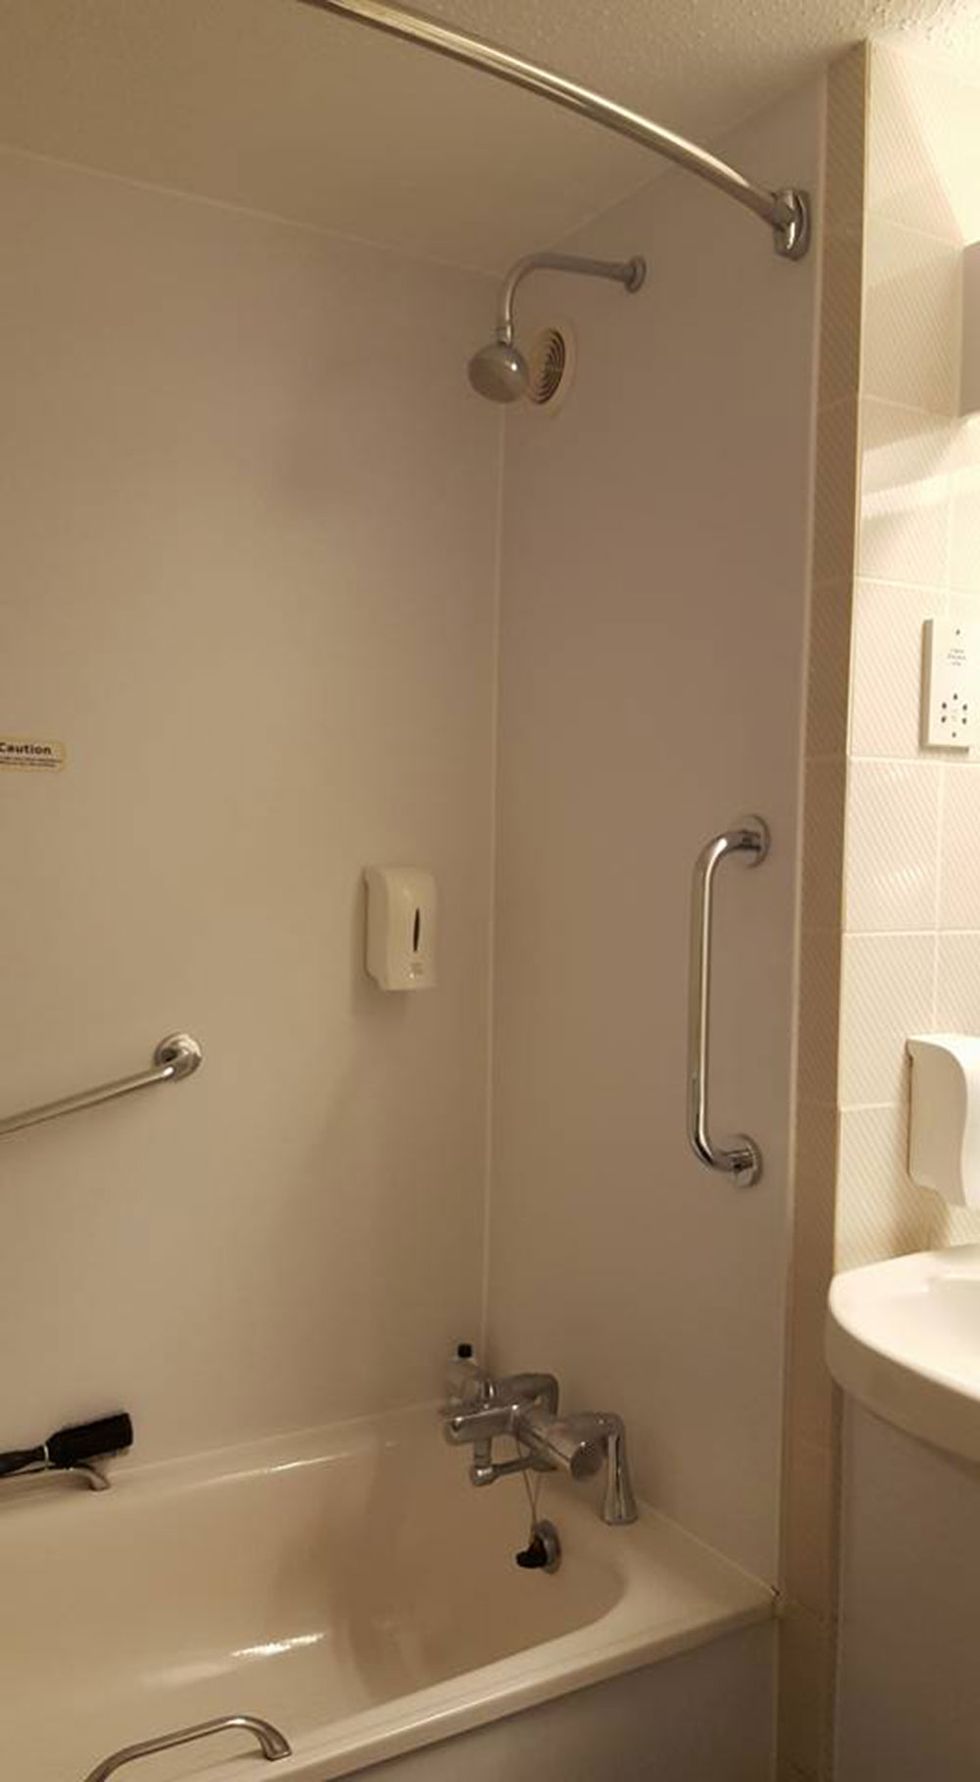 Woman finds hidden camera in Travelodge room while she was taking a shower